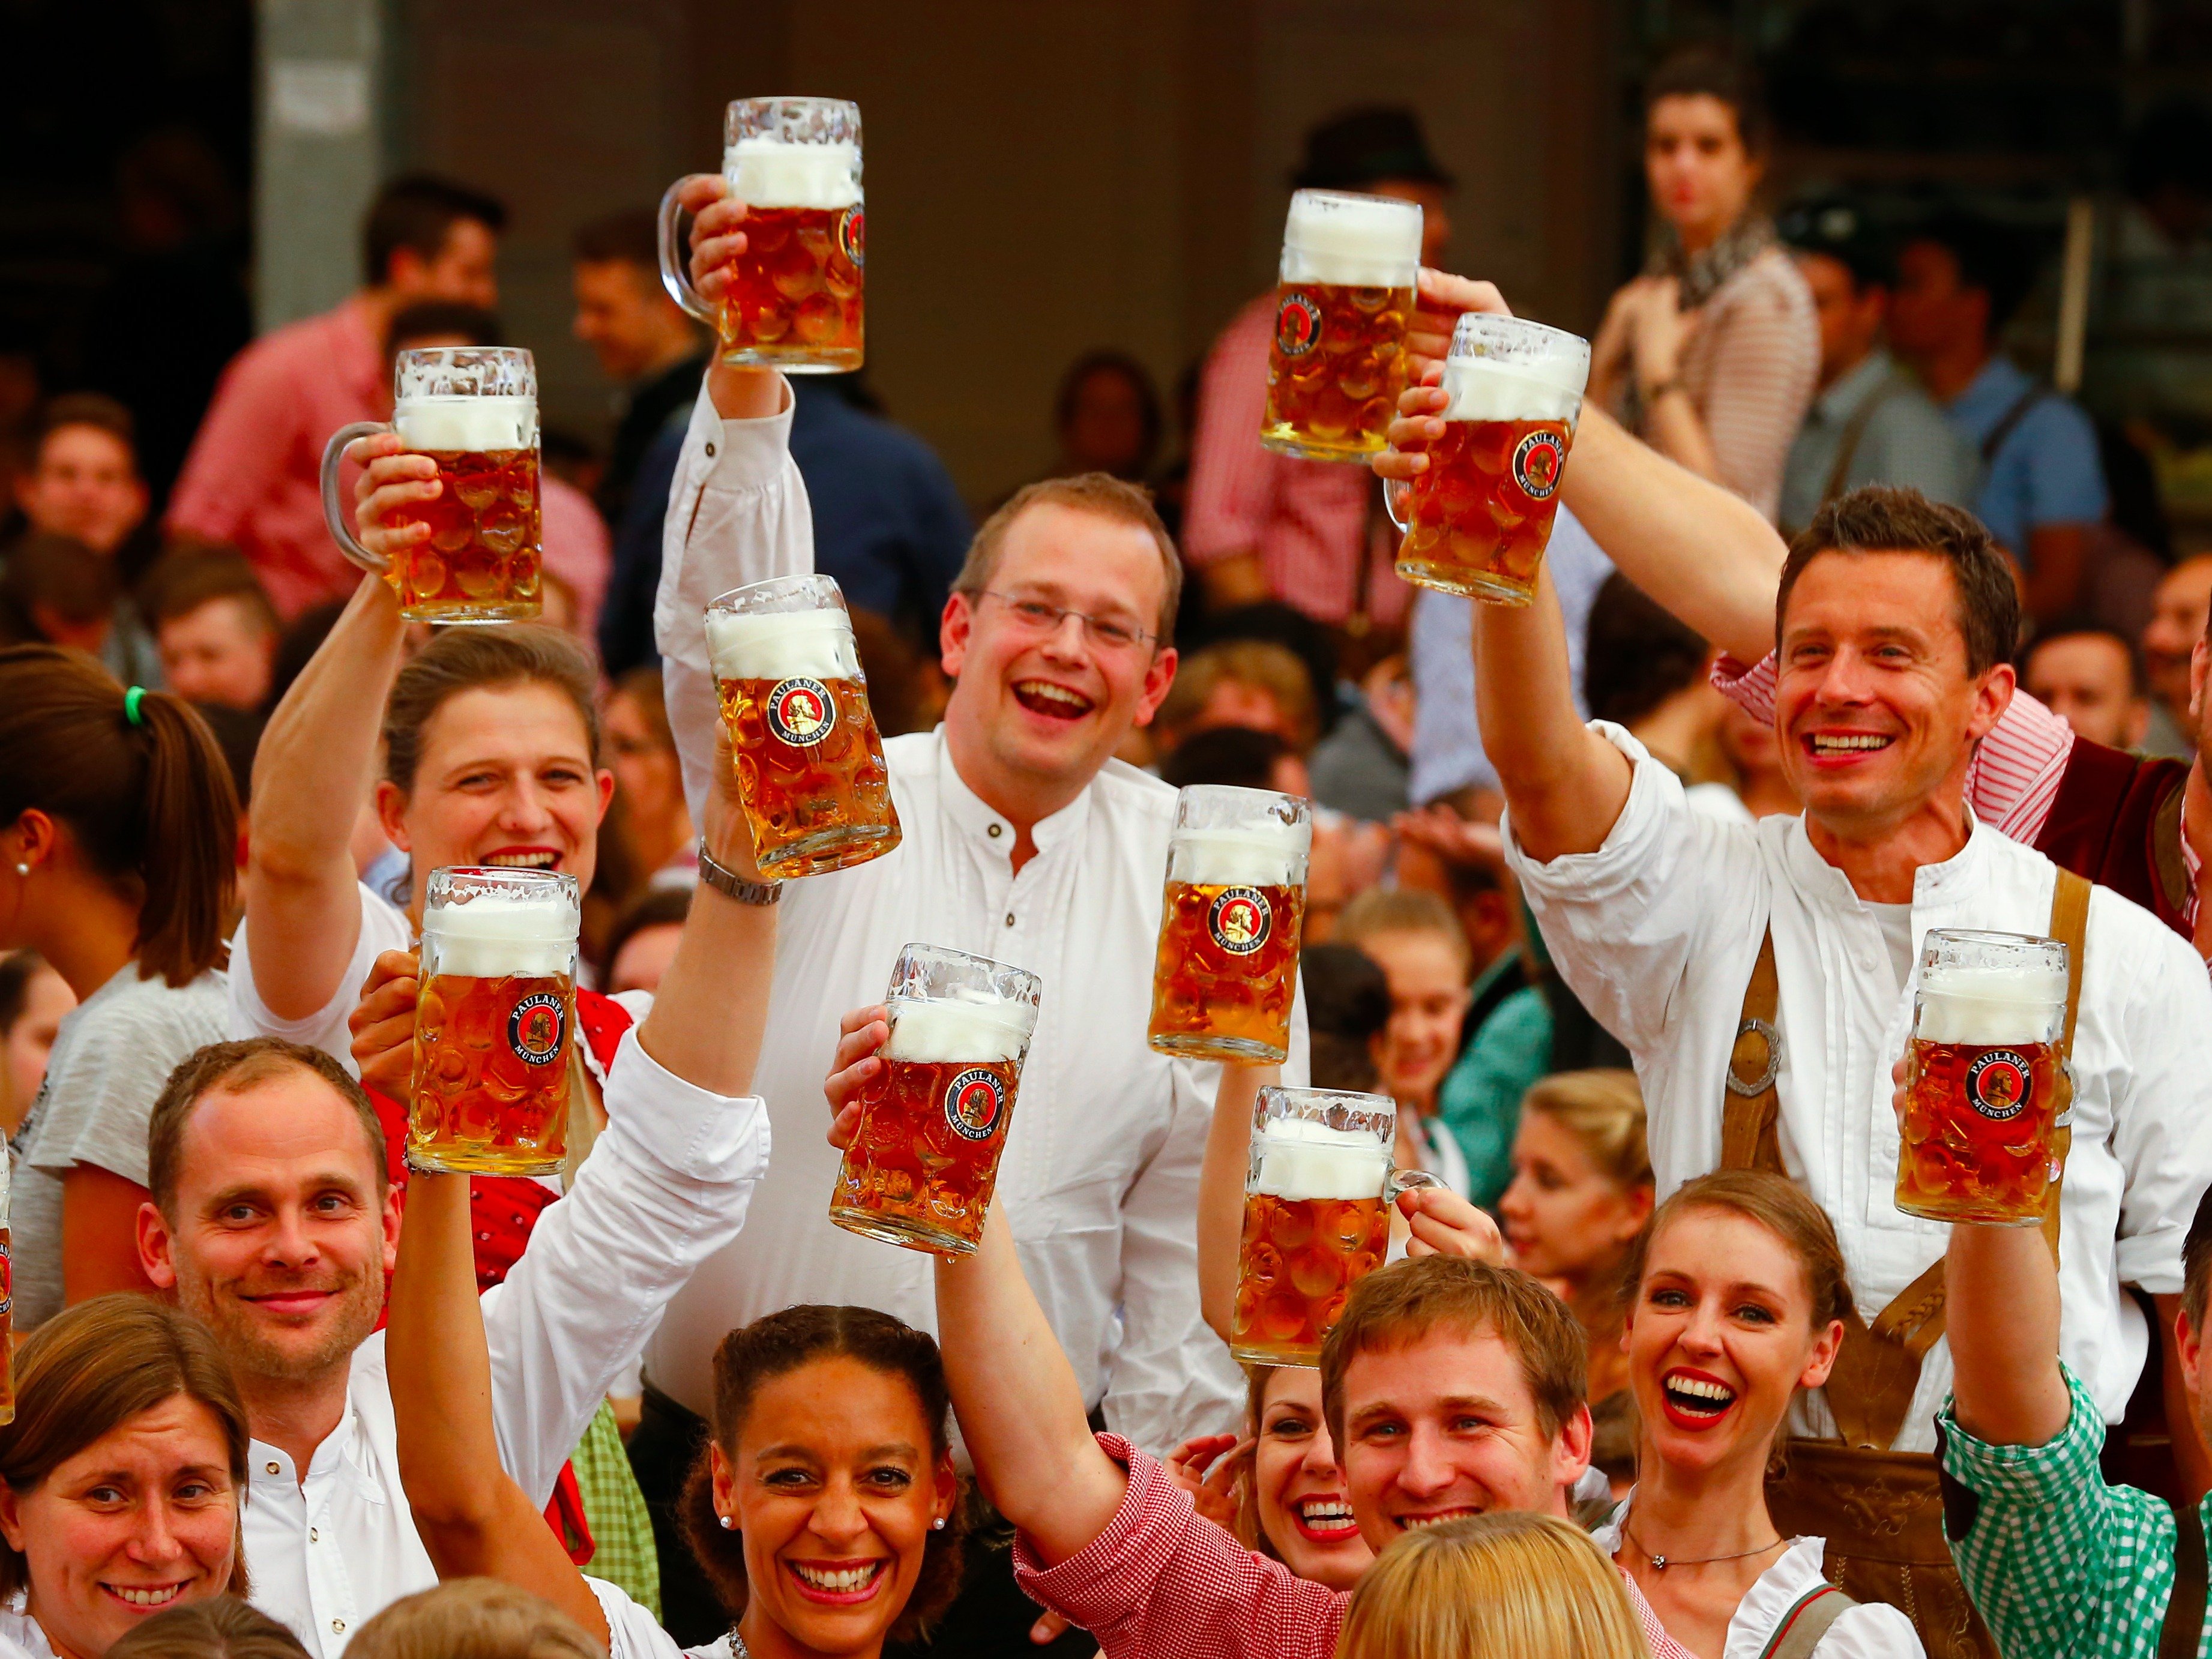 Worldâ€™s biggest beer makers agree to join forces